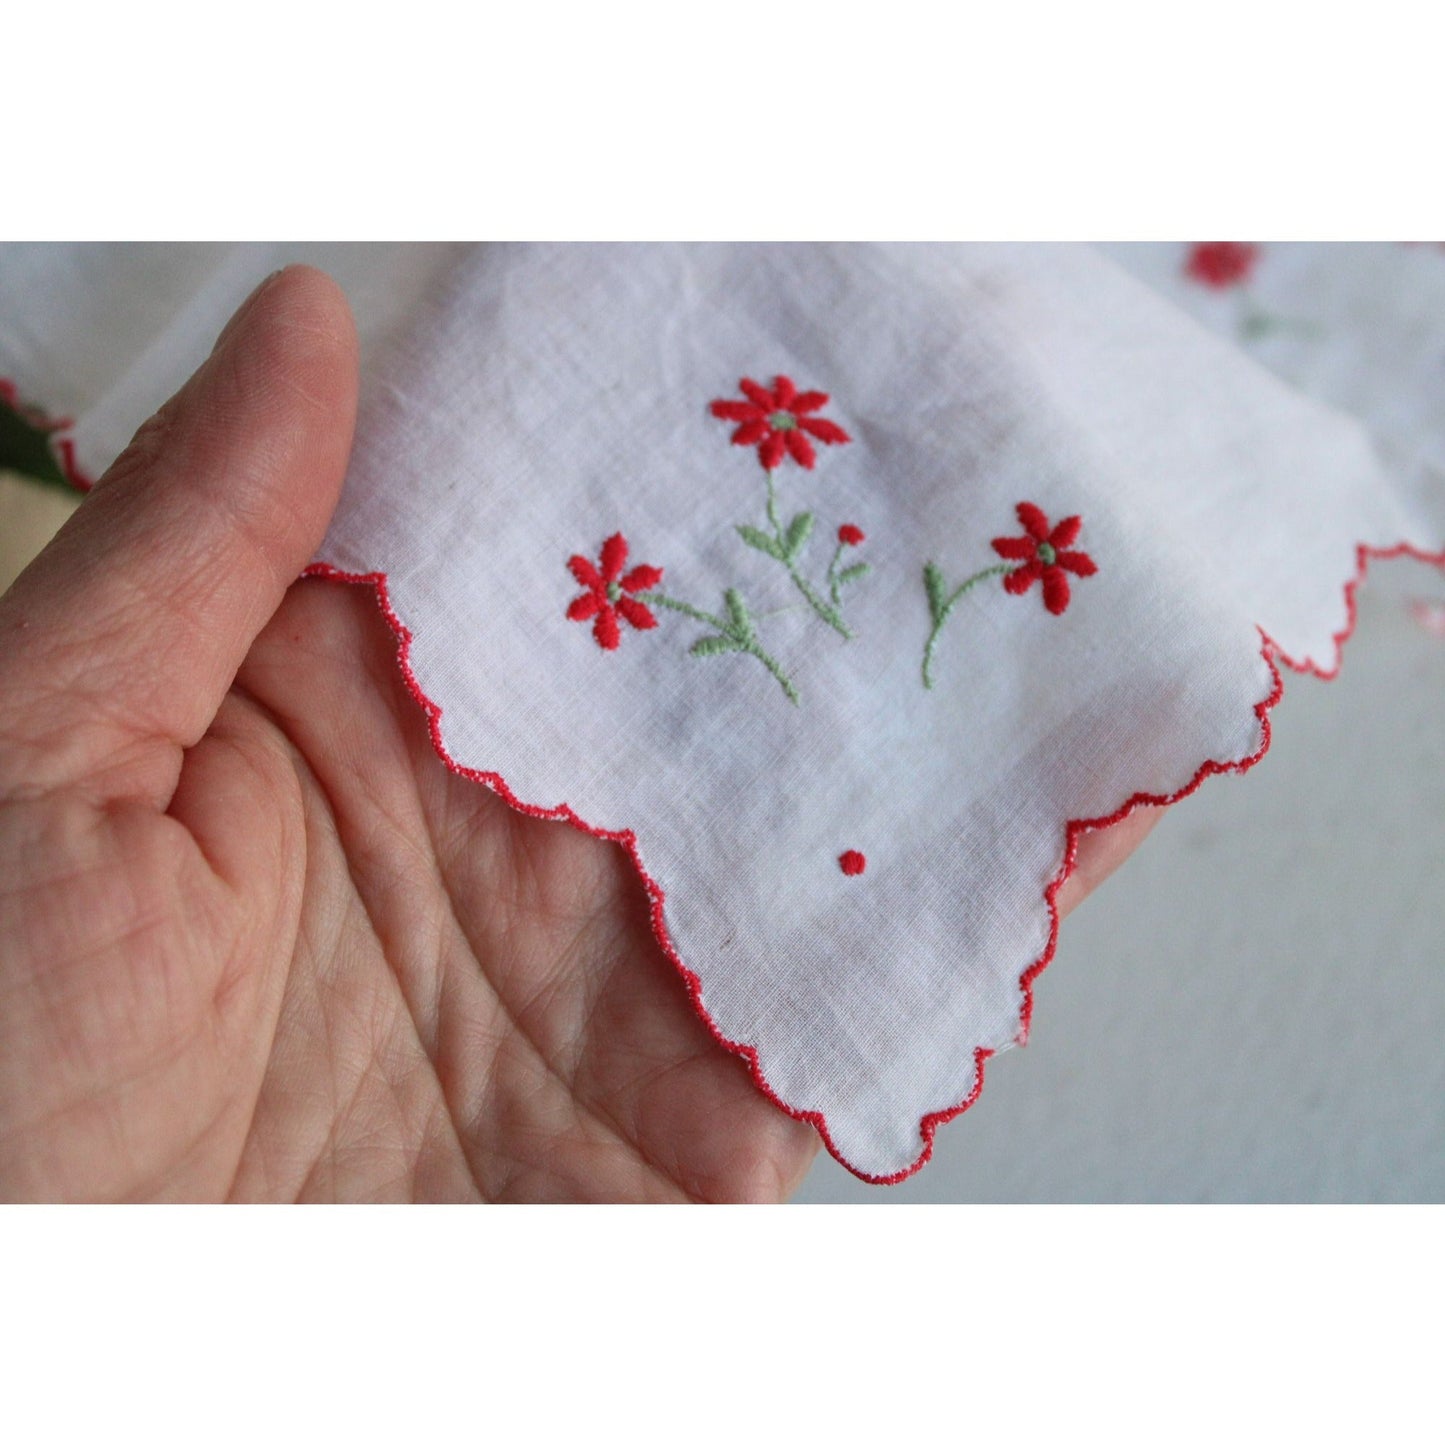 Vintage White Cotton Hankie with Red Flower Embroidery